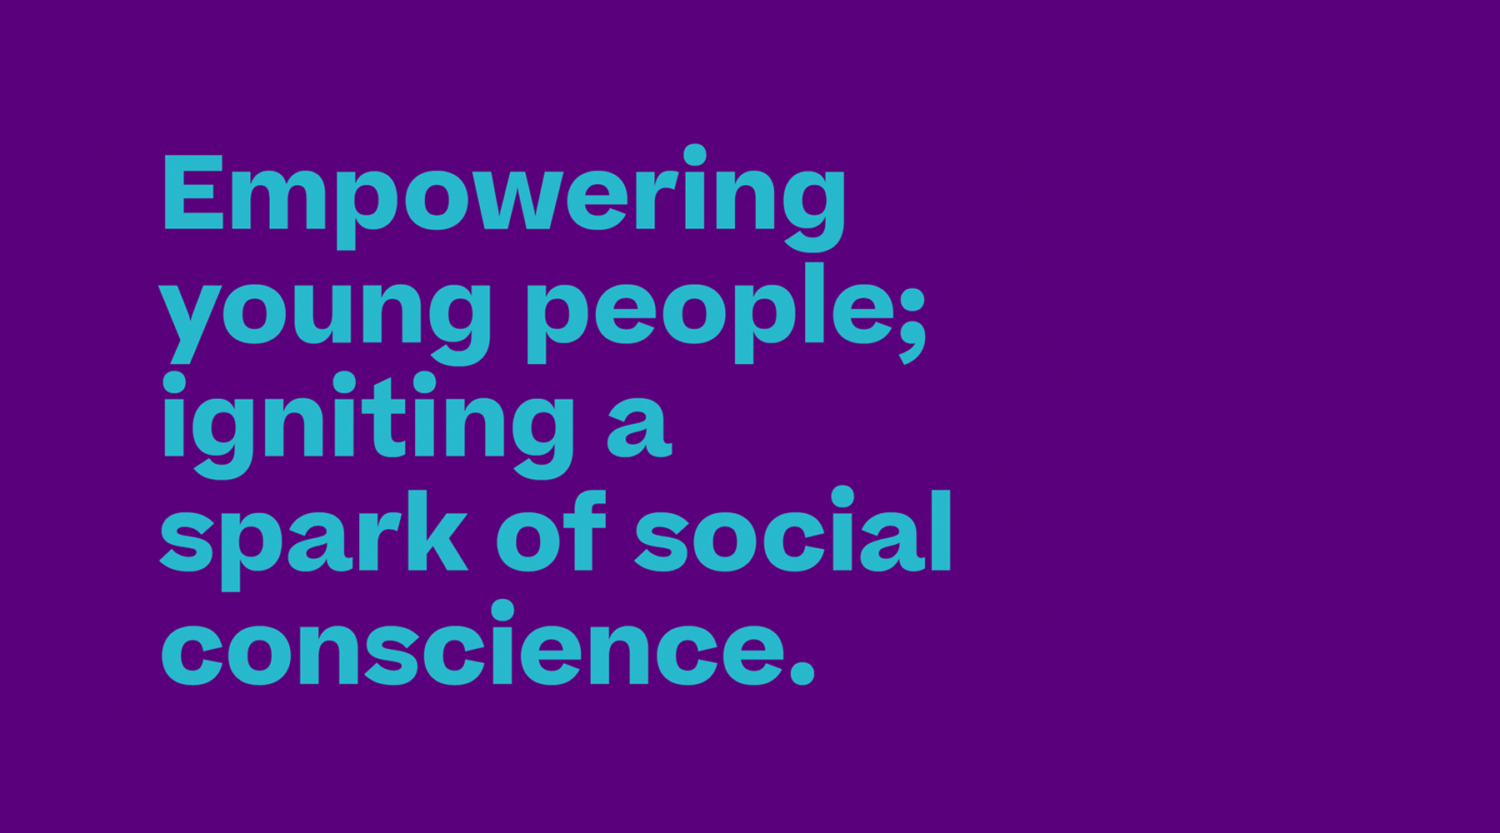 Empowering young people; igniting a spark of social conscience - the First Give purpose statement and brand proposition